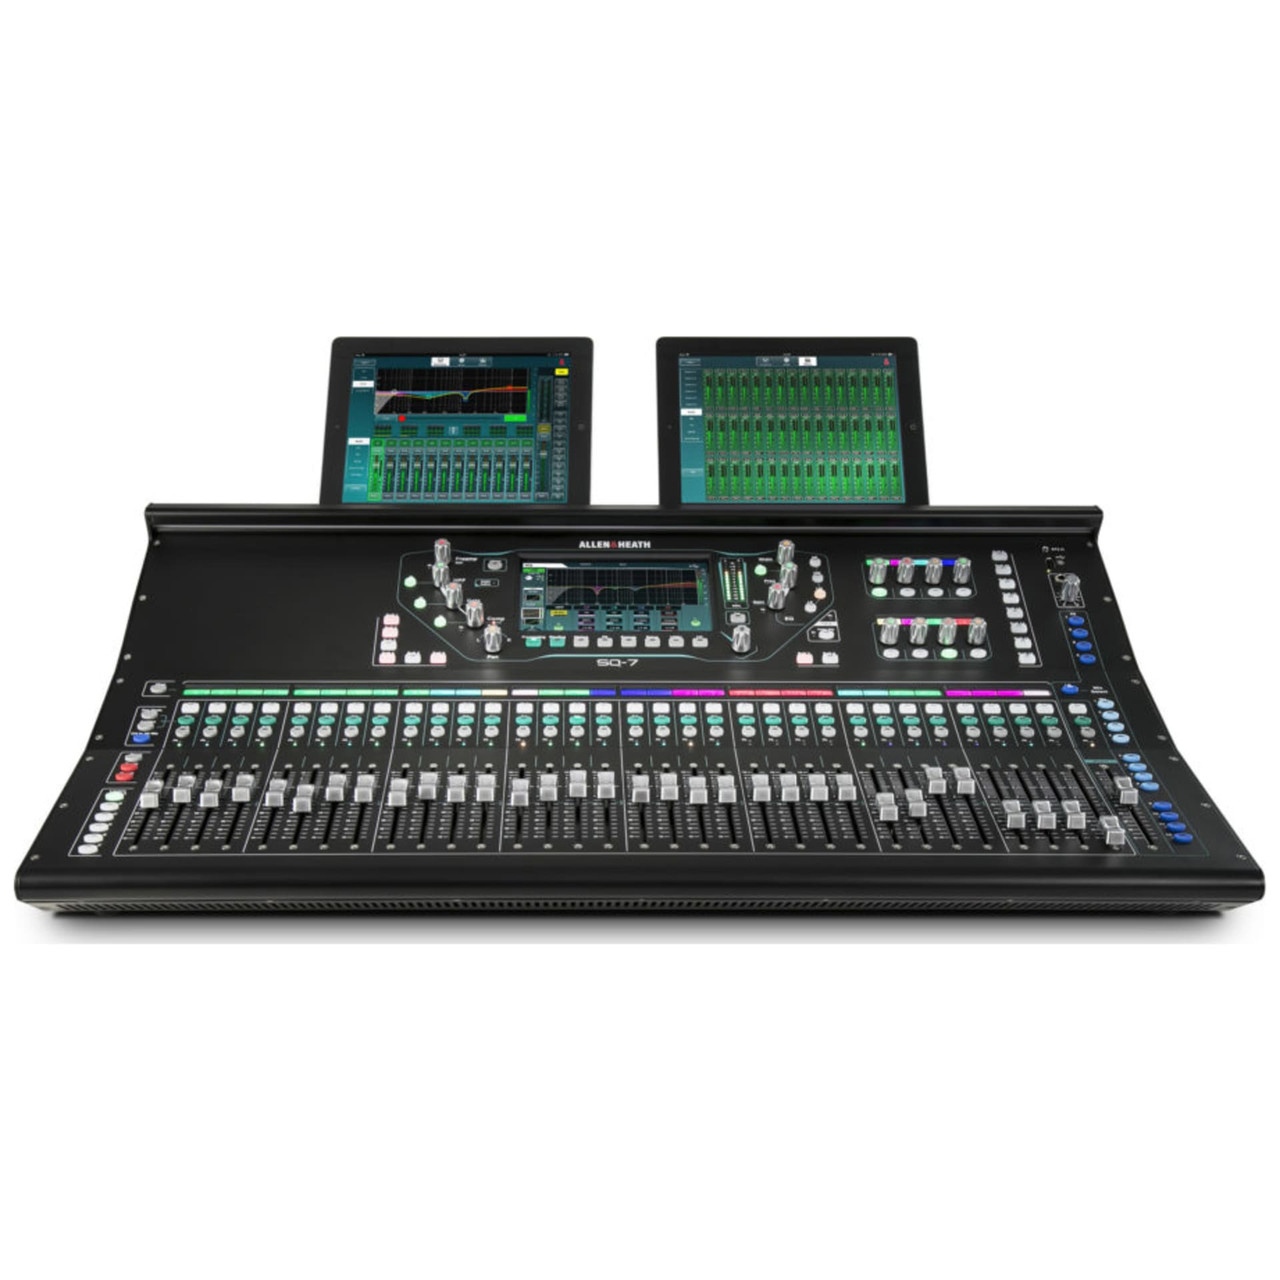 ALLEN & HEATH SQ-7 96kHz XCVI FPGA processing, Input Channels, DEEP Processing, 33 Faders / 6 Layers, onboard preamp,12 Stereo mixes+LR, Stereo Matrix, 7 " capacitive touchscreen | EMI Audio